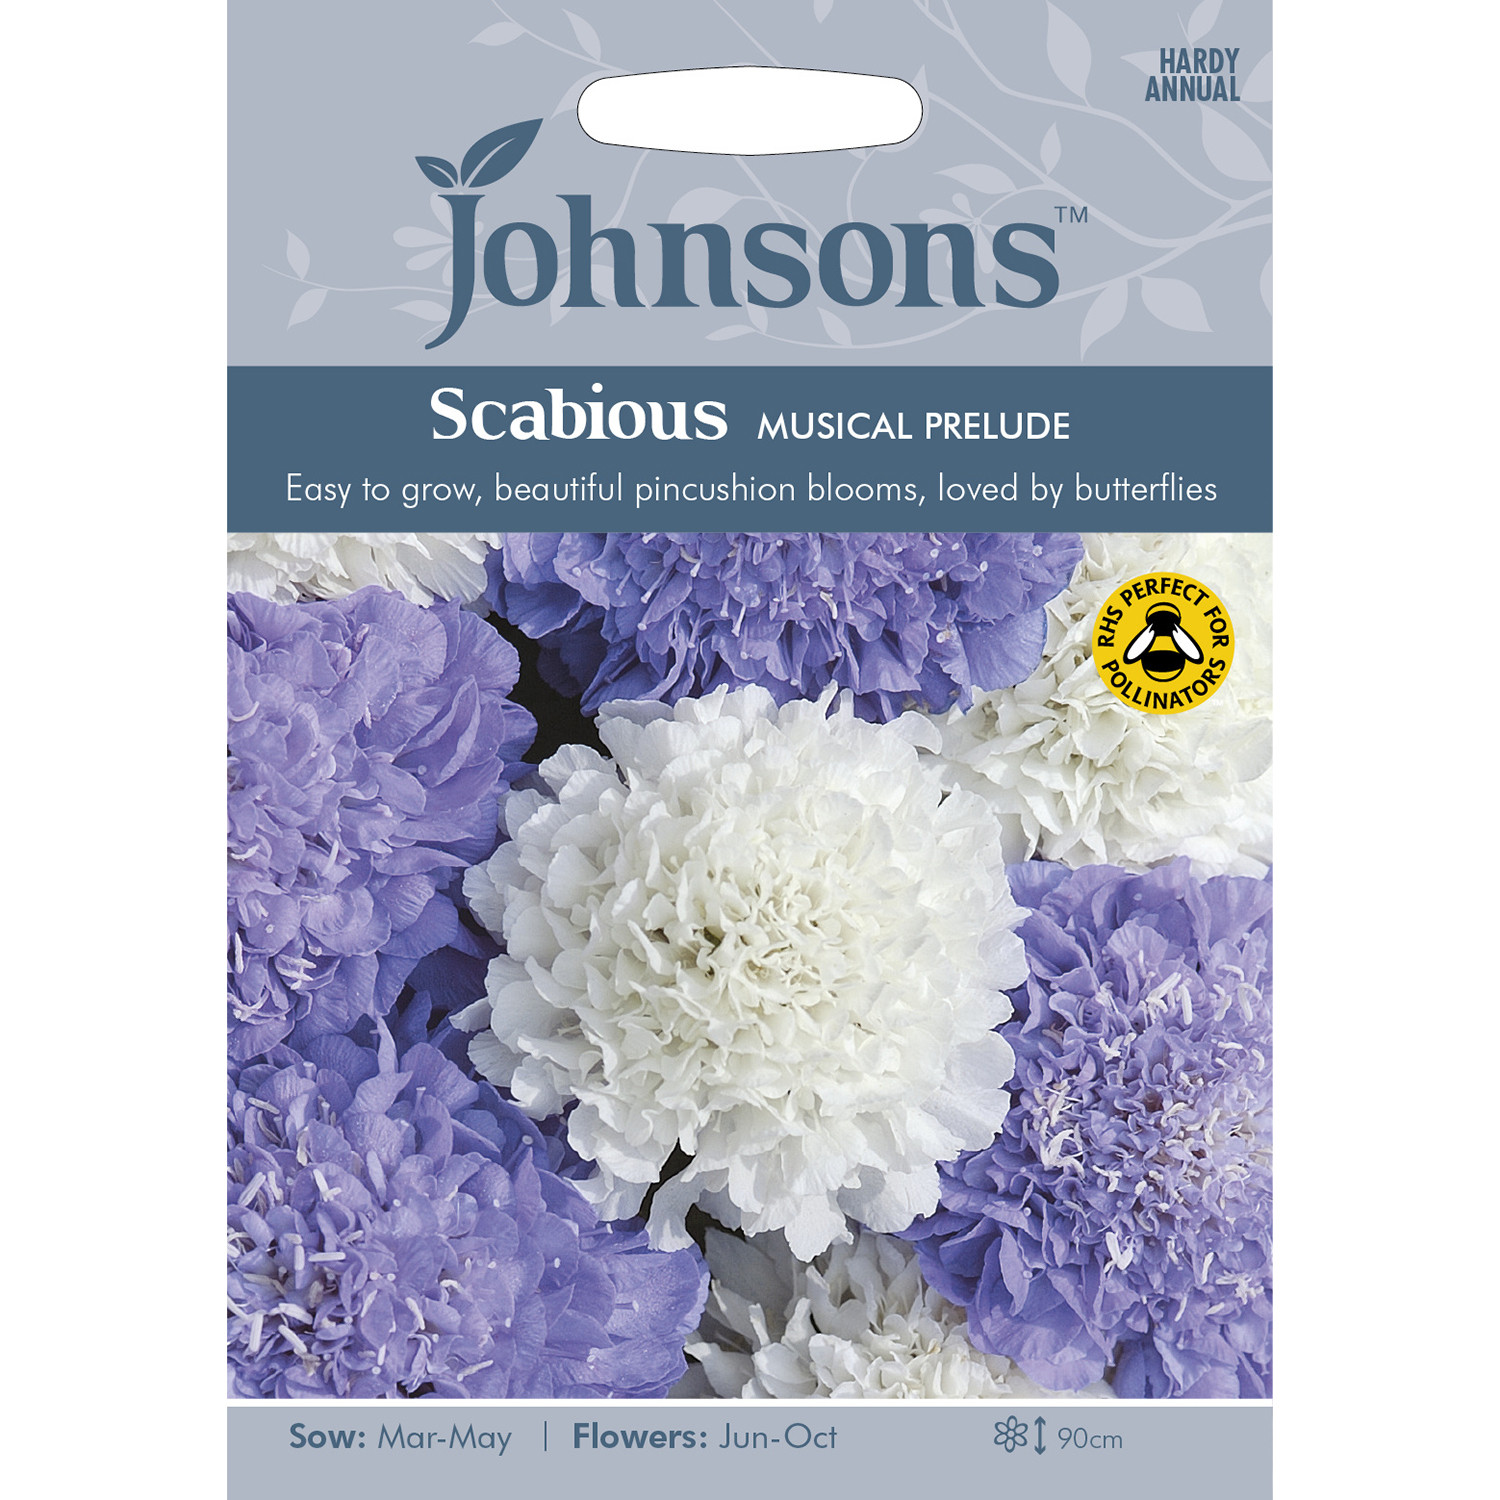 Johnsons Scabious Musical Prelude Flower Seeds Image 2